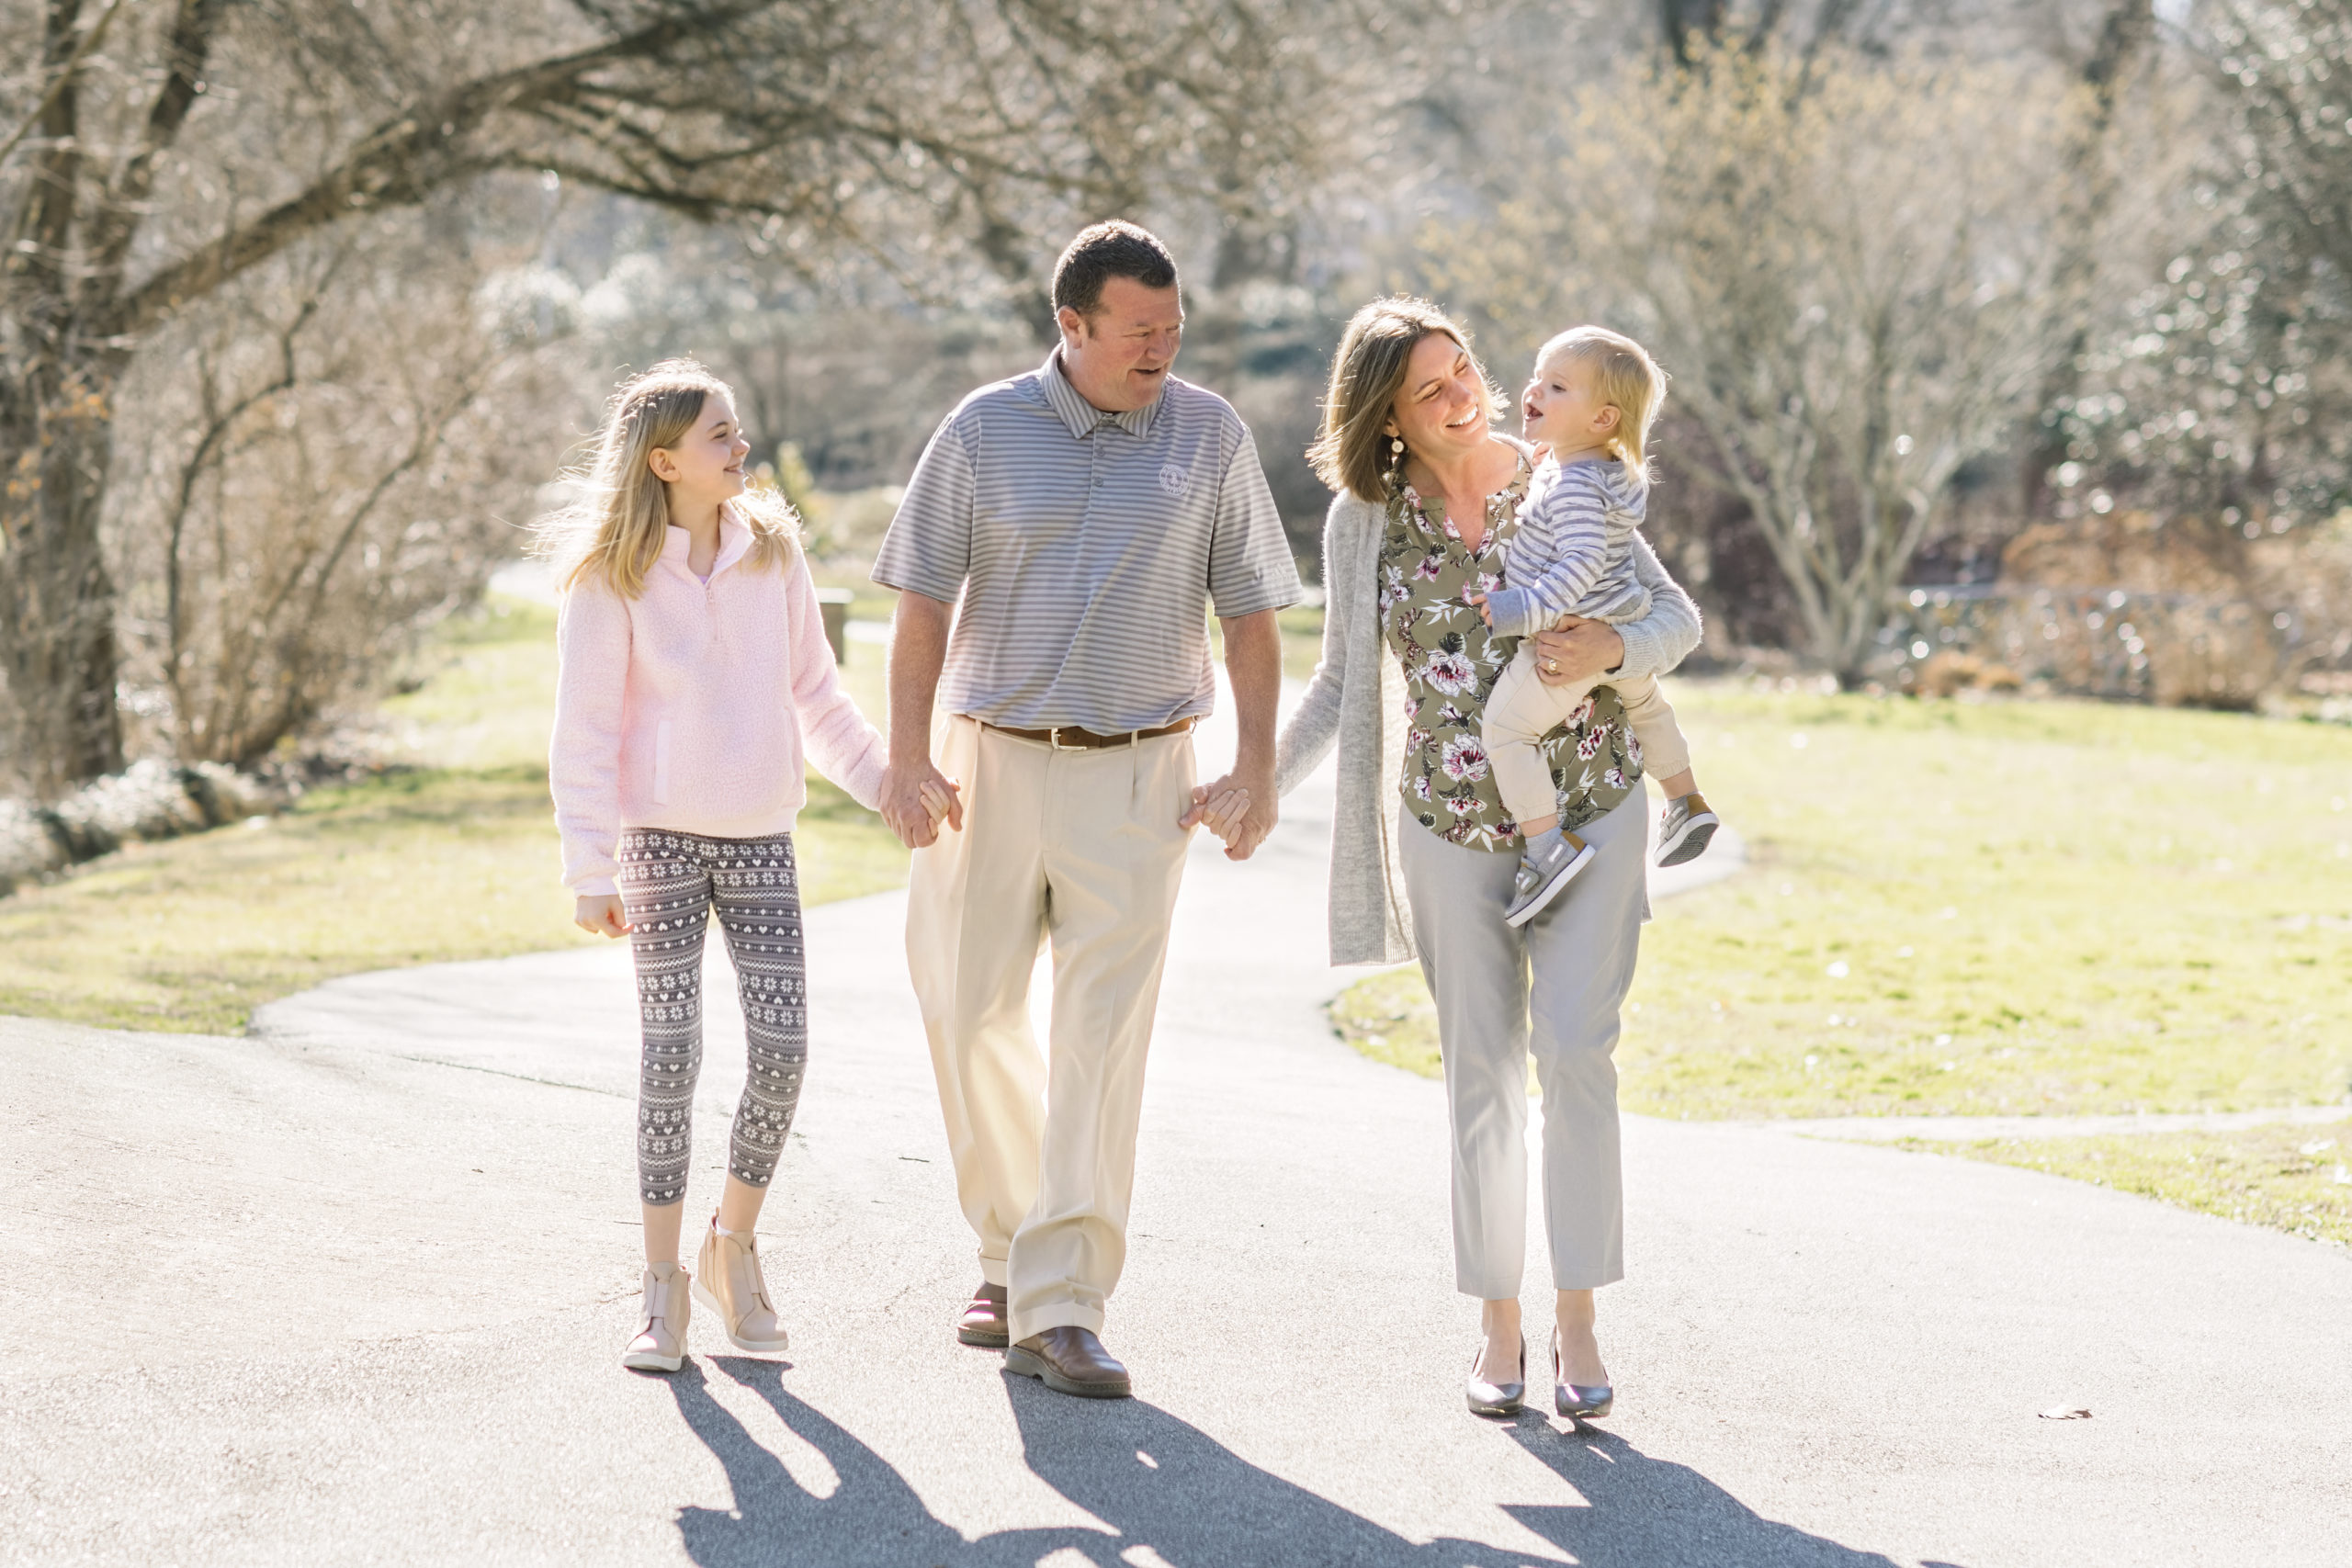 Family walking together, part of the Q&A with Family Mediator Brooke Schmidly